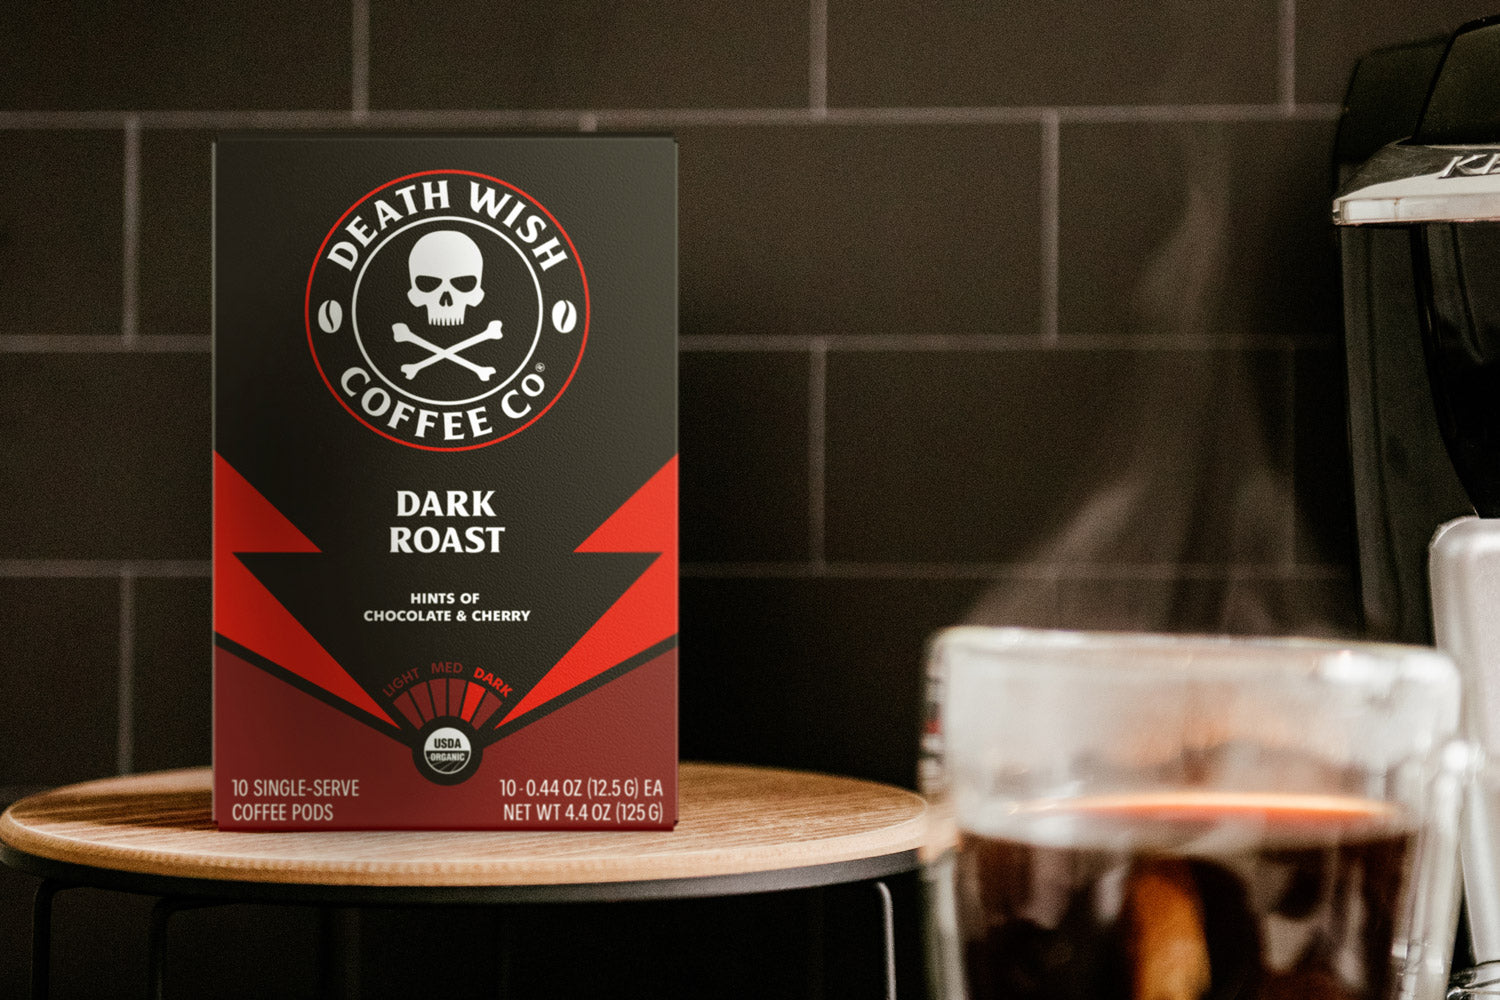 Why You Should Think Twice About Ordering Dark Roast Coffee